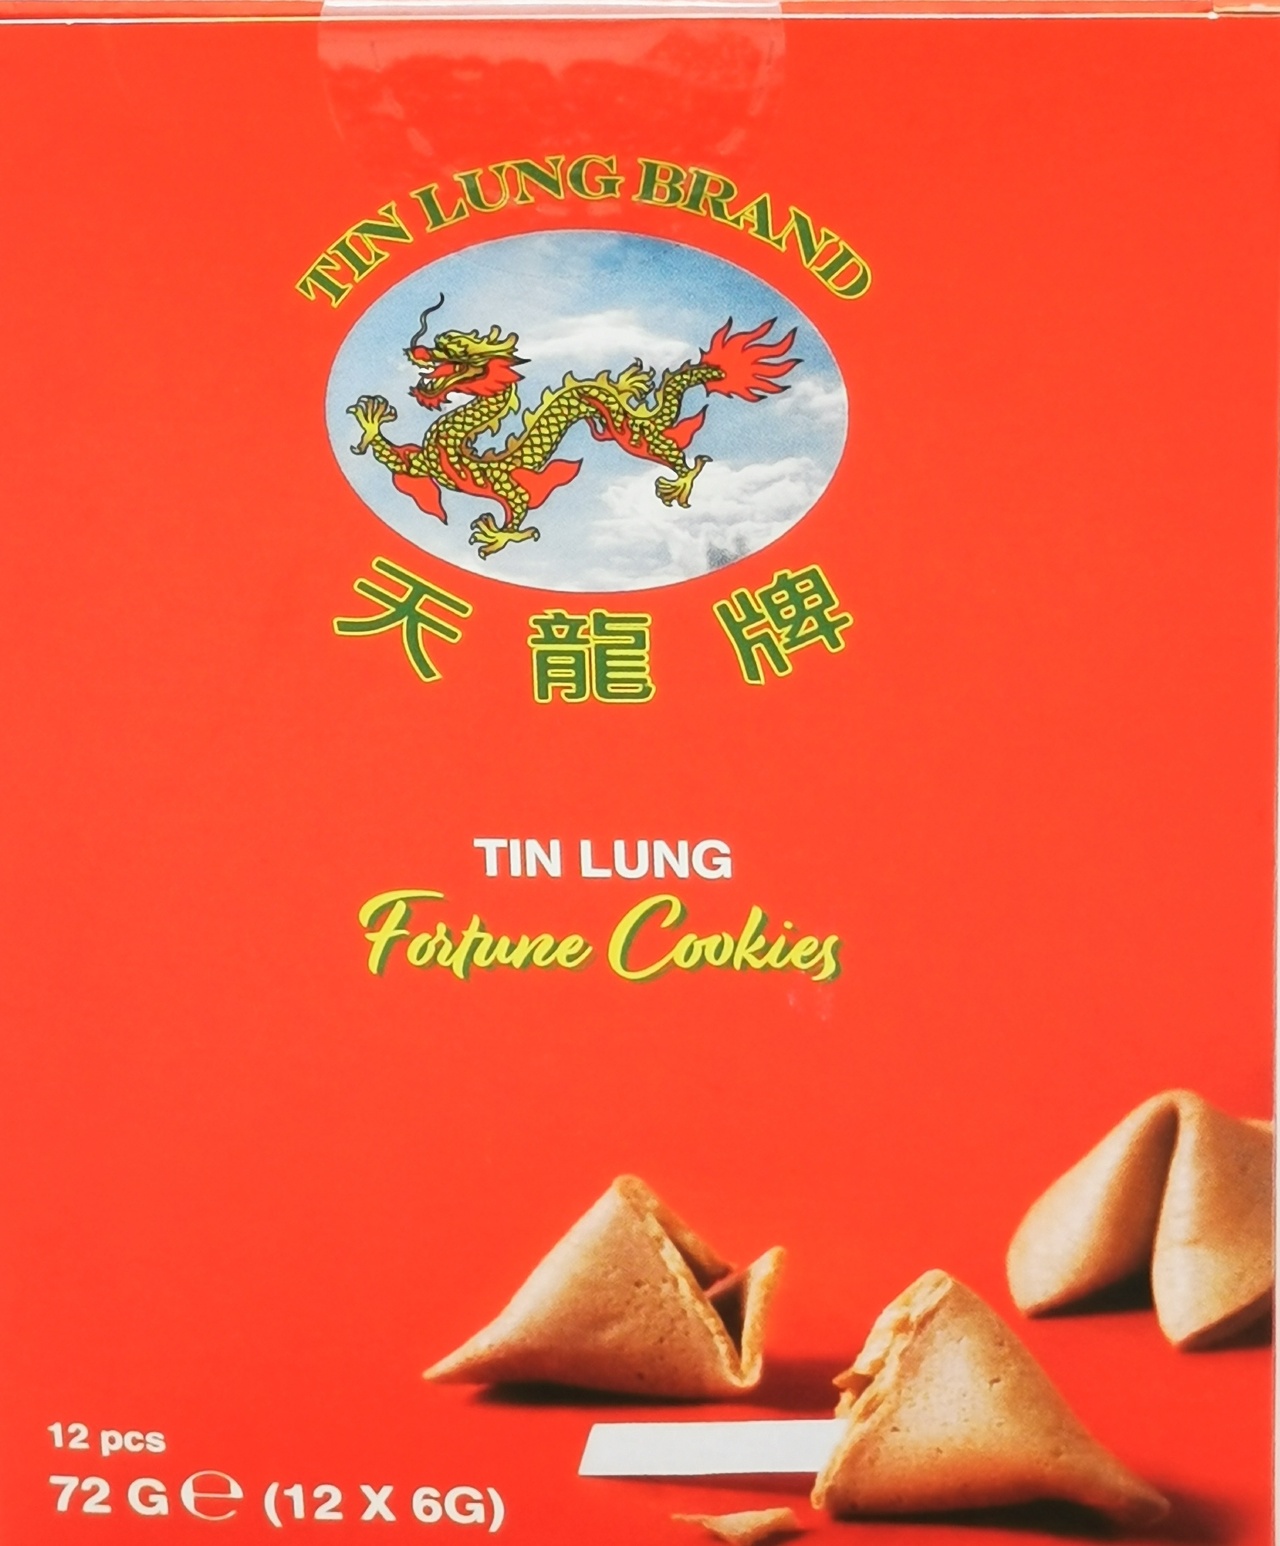 Tin lung fortune cookies 12pcs